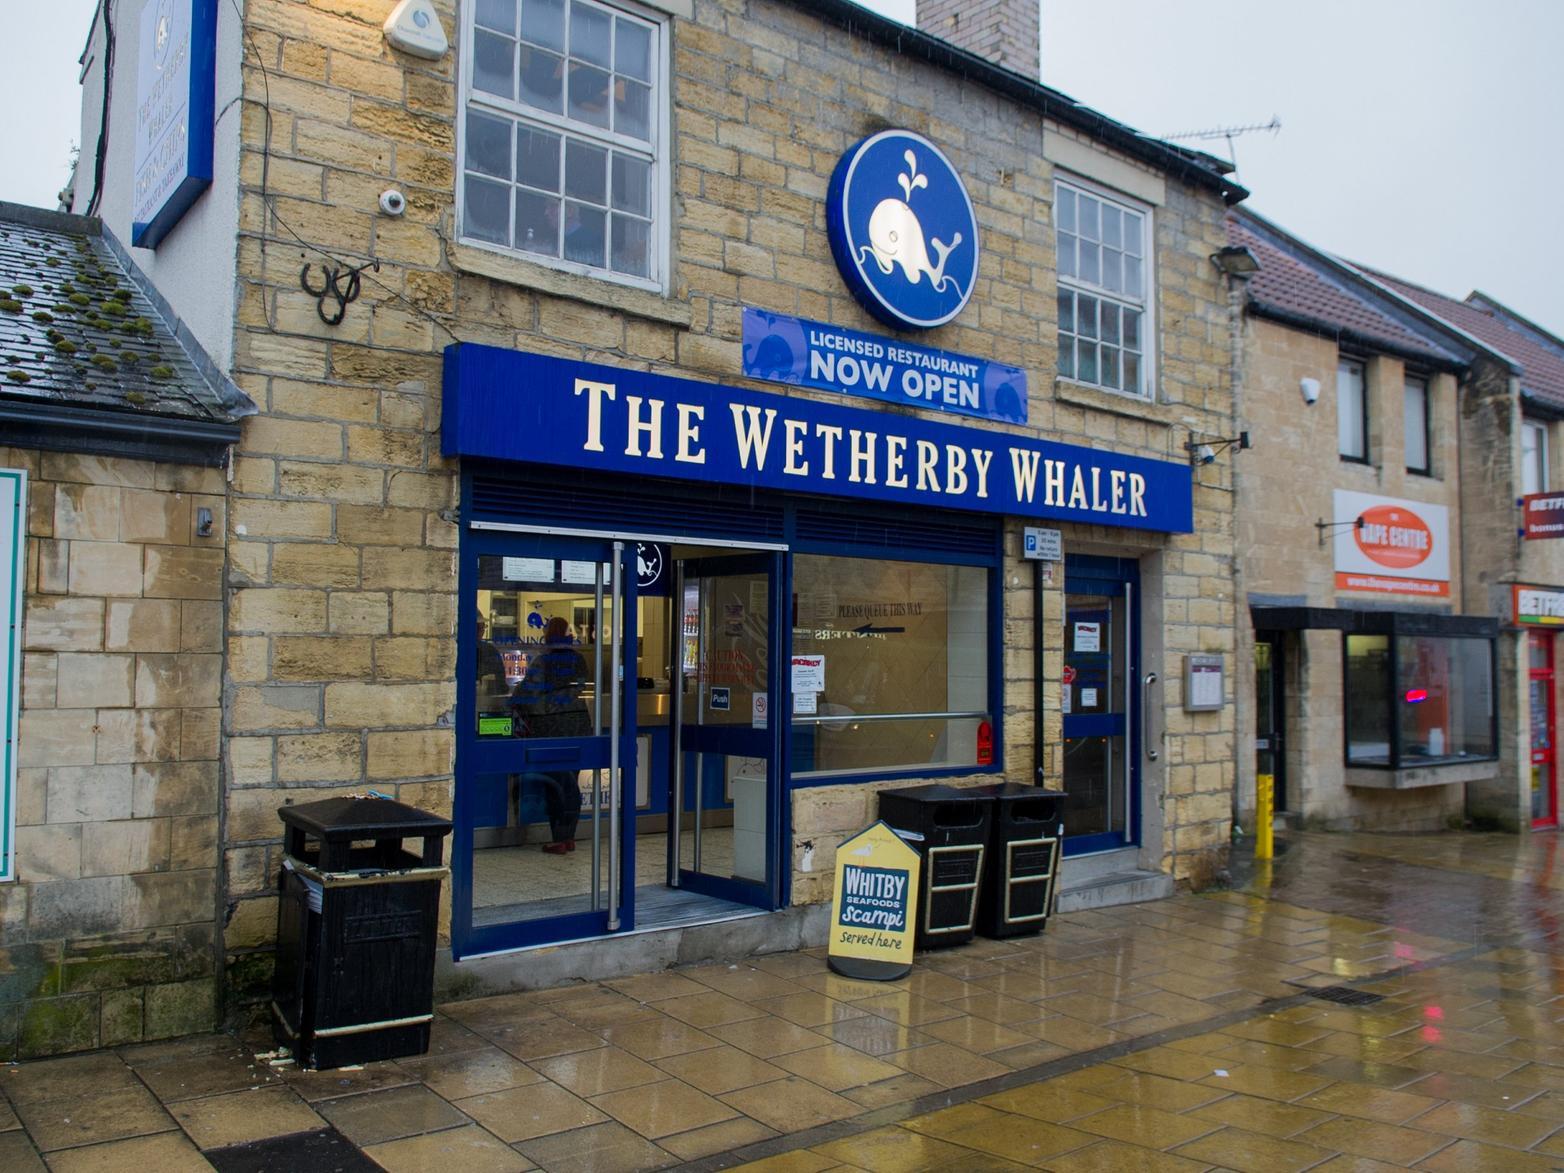 The original Wetherby Whaler comes top of the Trip Advisor list and is praised by reviewers as "THE best chippy in the UK".